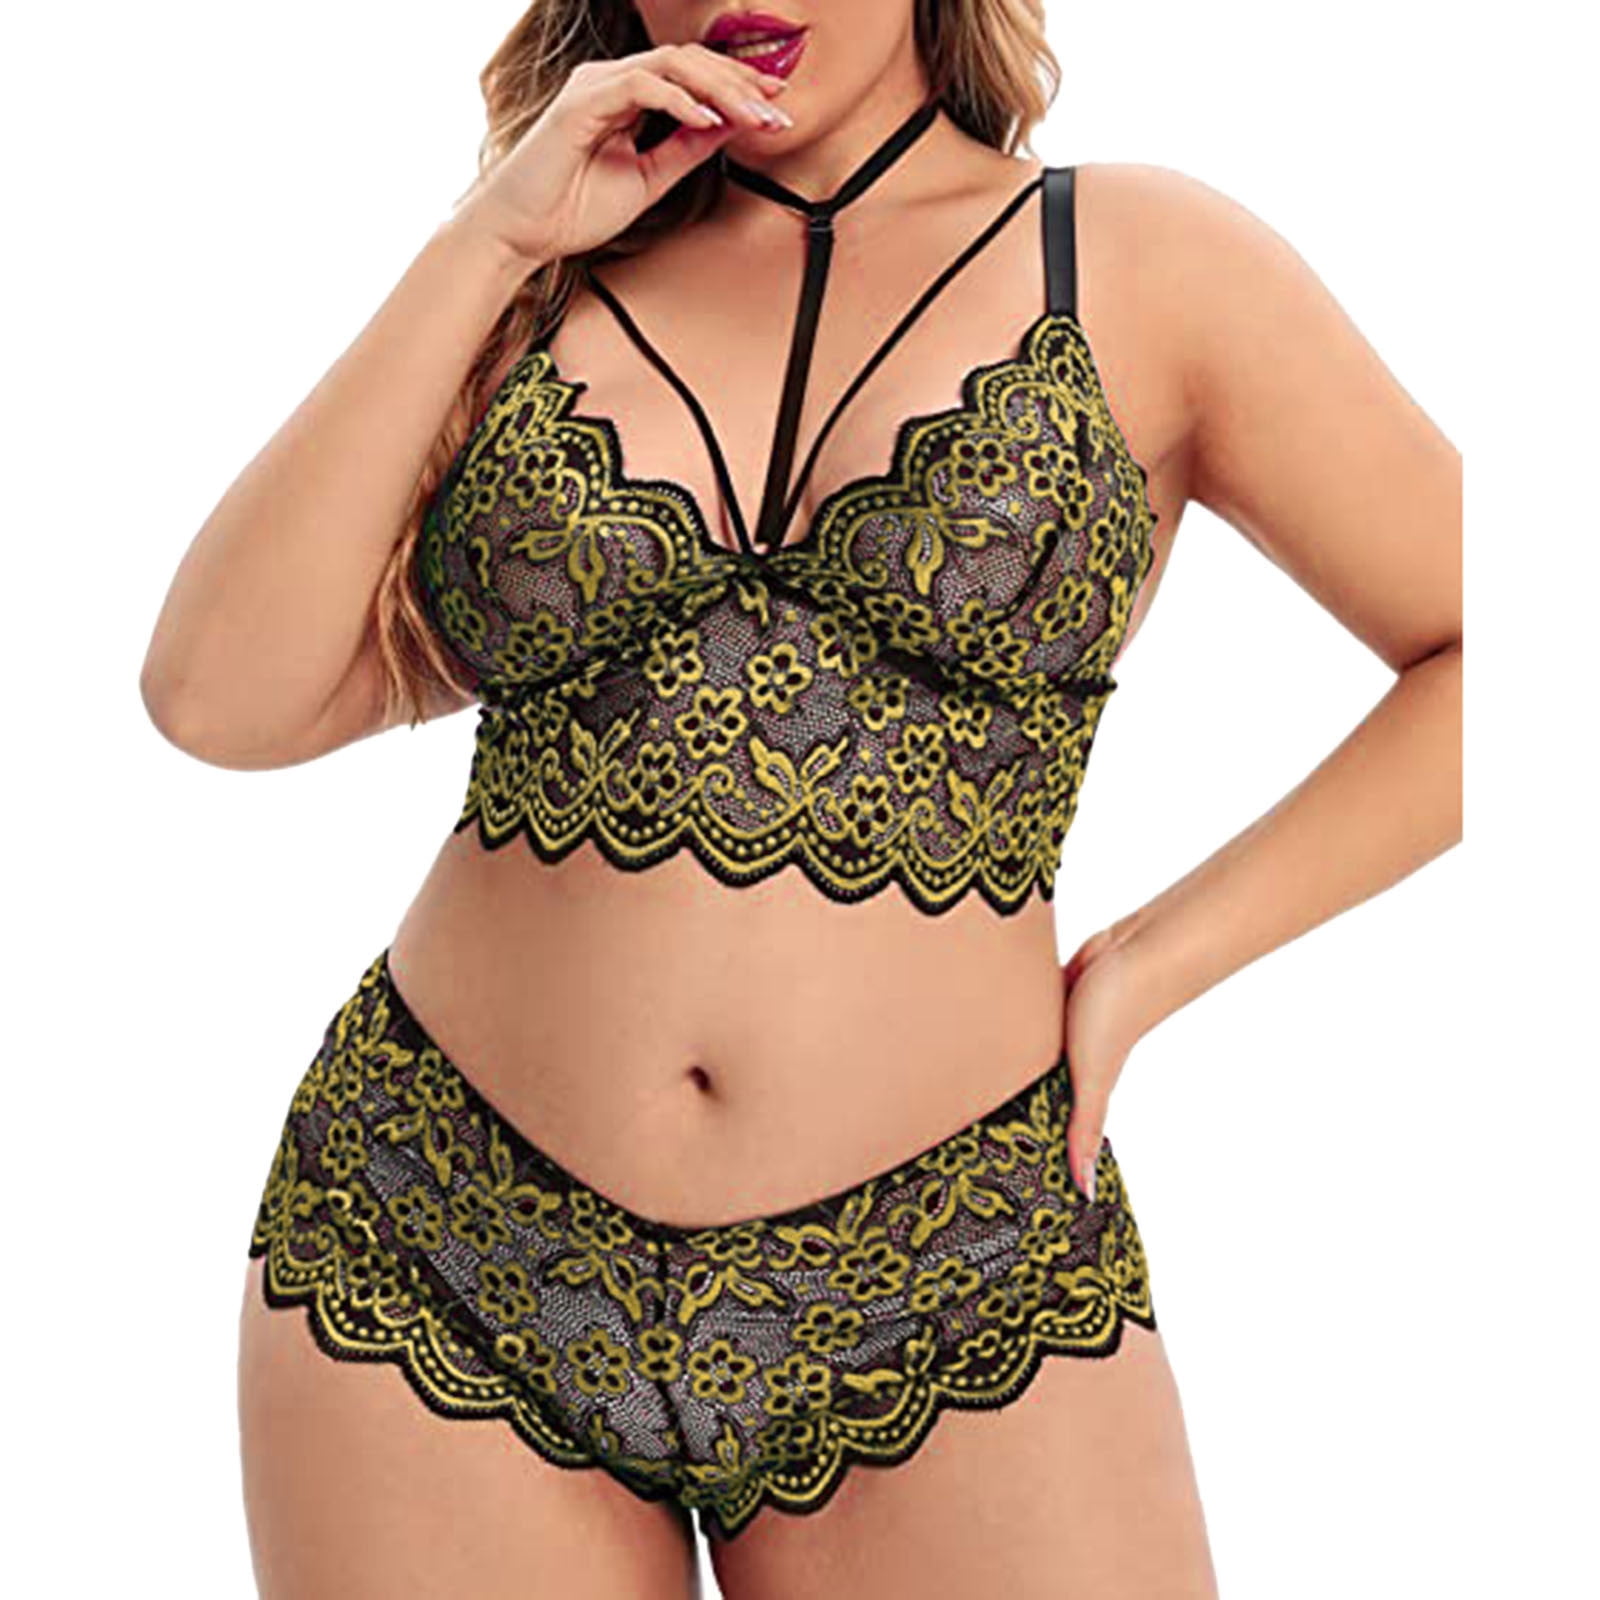  Womens Plus Size Long Line Bra and Panty Gartered Lace Net Lingerie  Bra Set Black: Clothing, Shoes & Jewelry